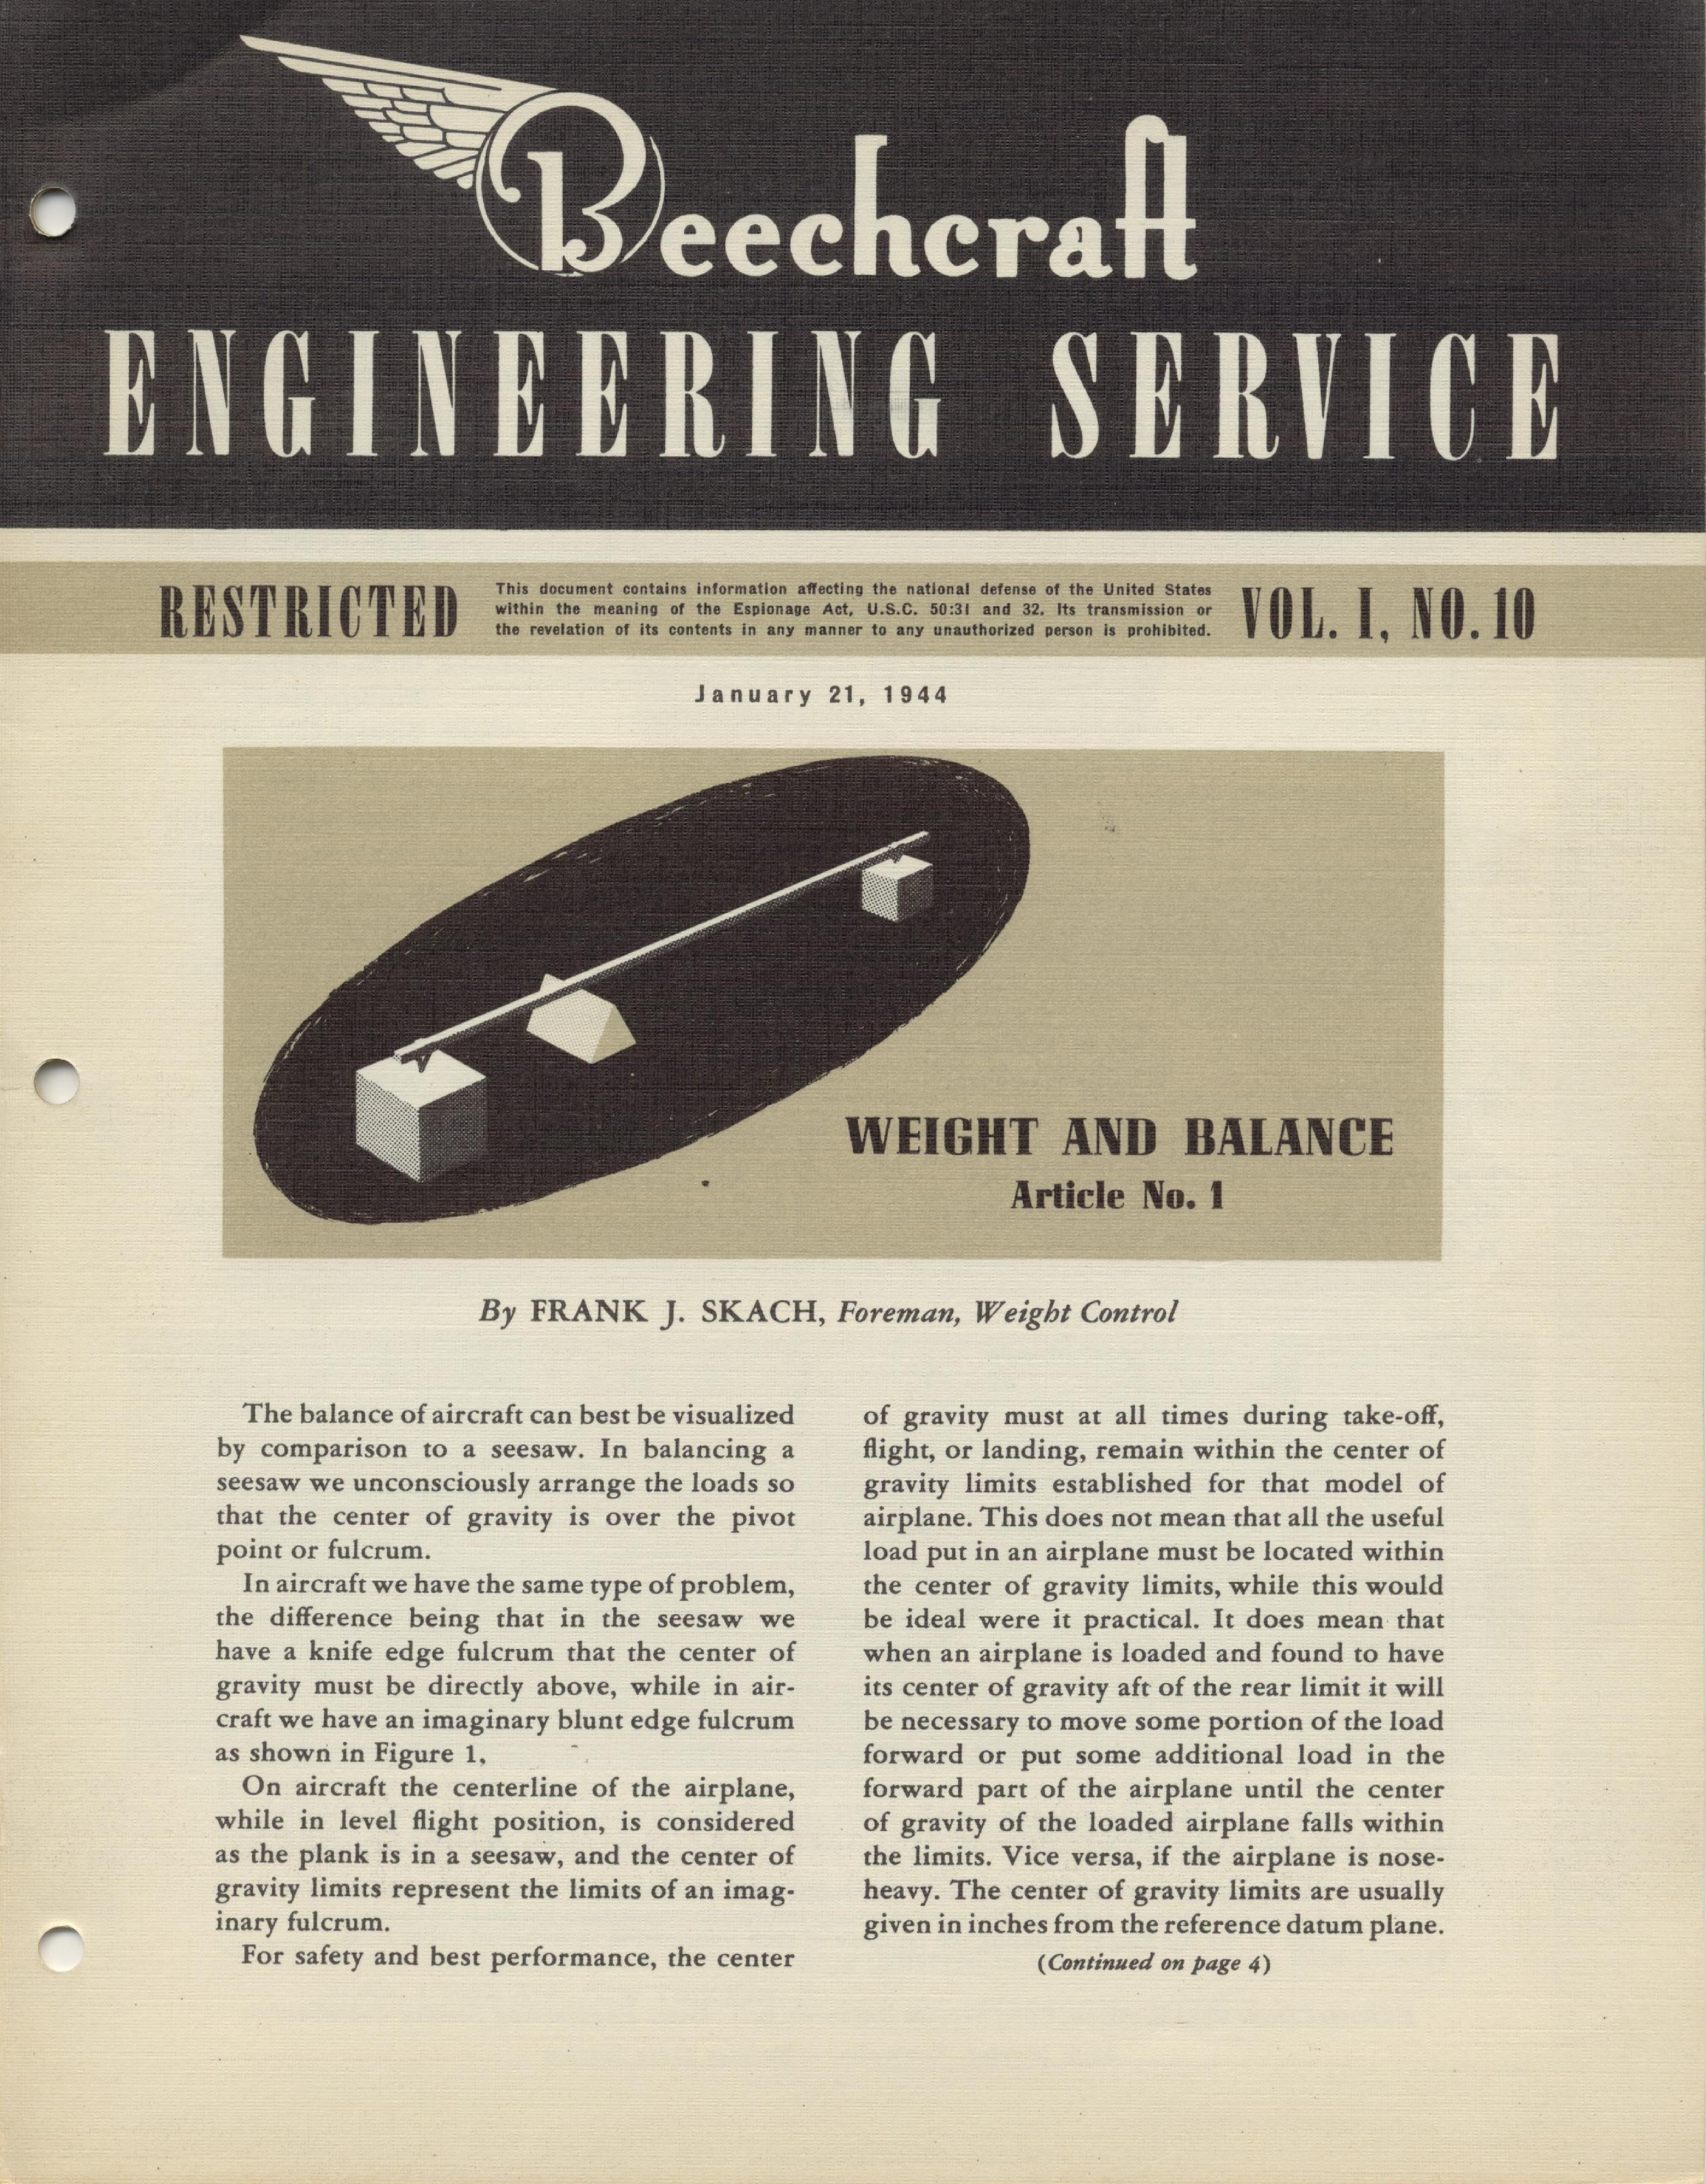 Sample page 1 from AirCorps Library document: Vol. I, No. 10 - Beechcraft Engineering Service